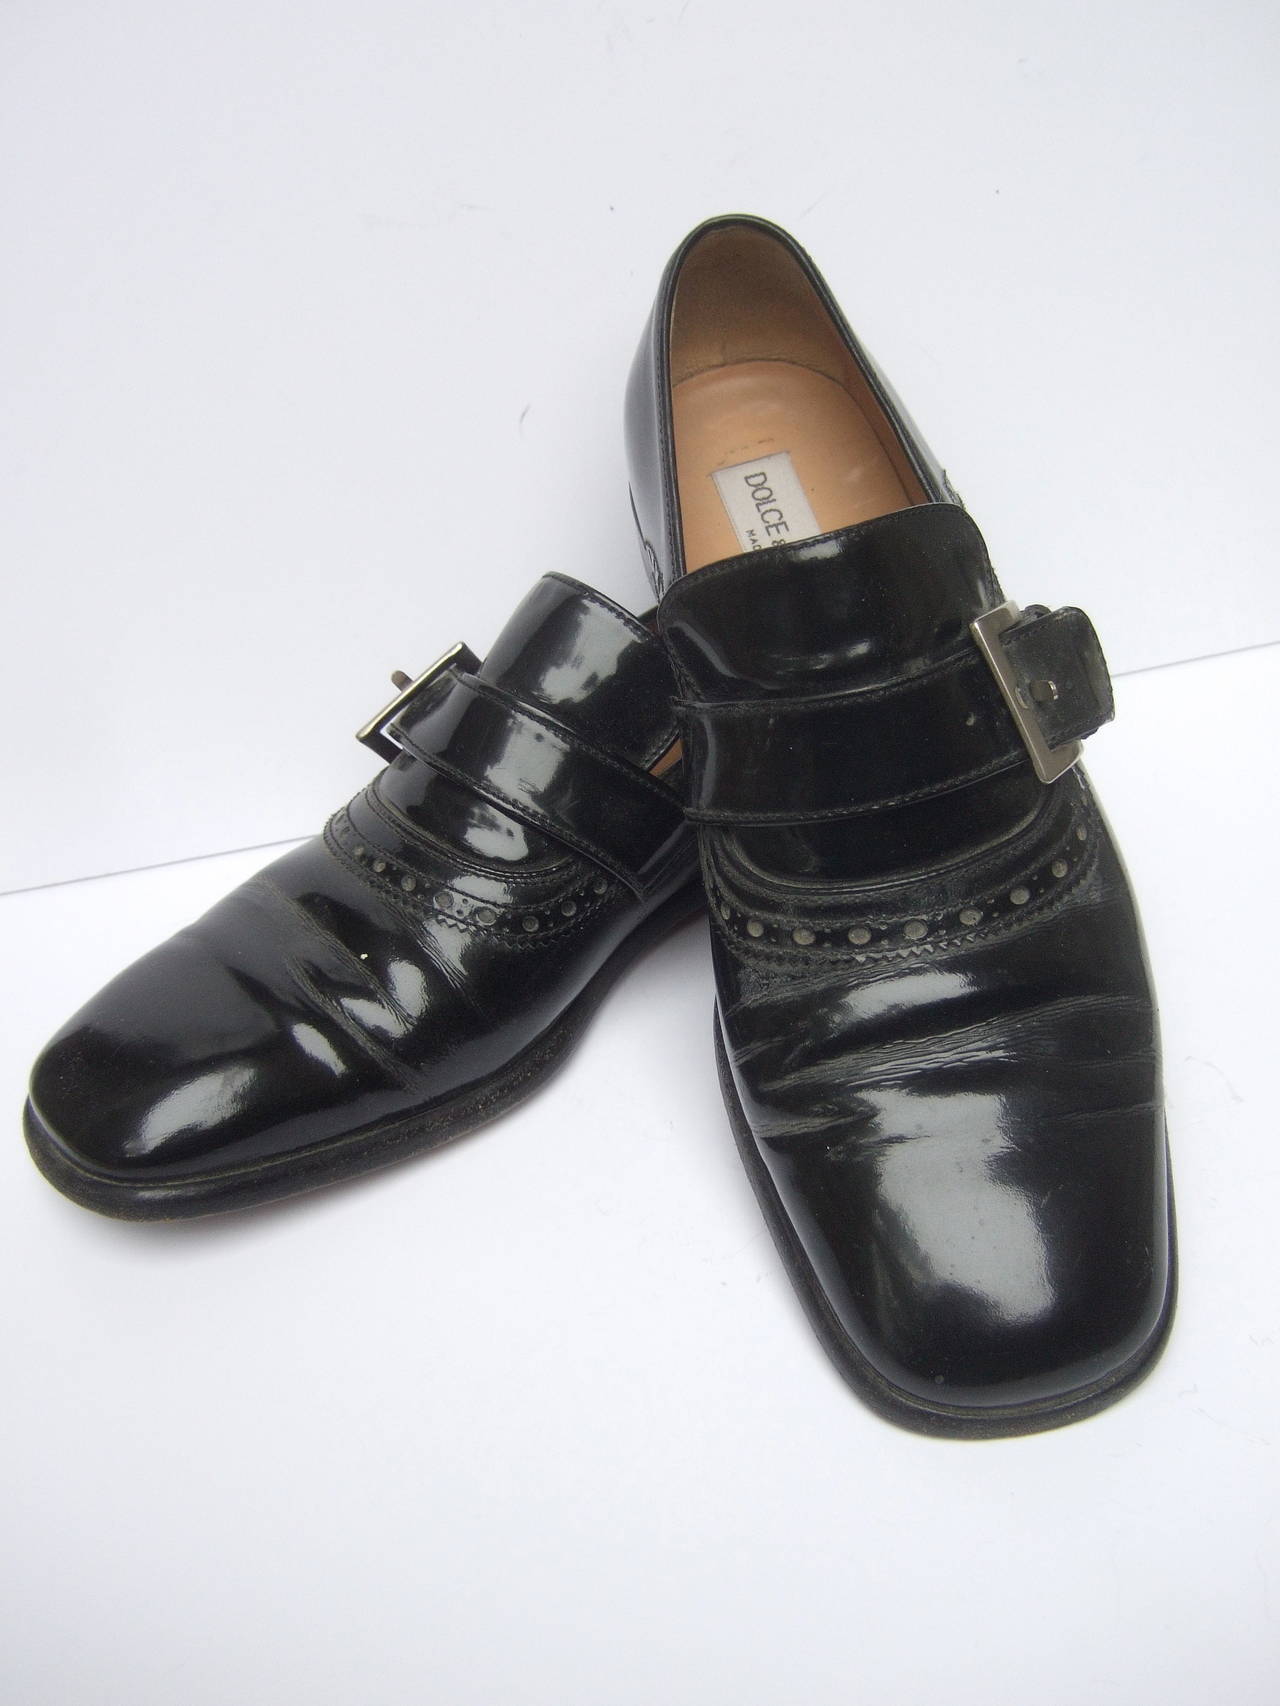 Dolce & Gabbana Men's Black Patent Leather Shoes US Size 8 In Good Condition For Sale In University City, MO